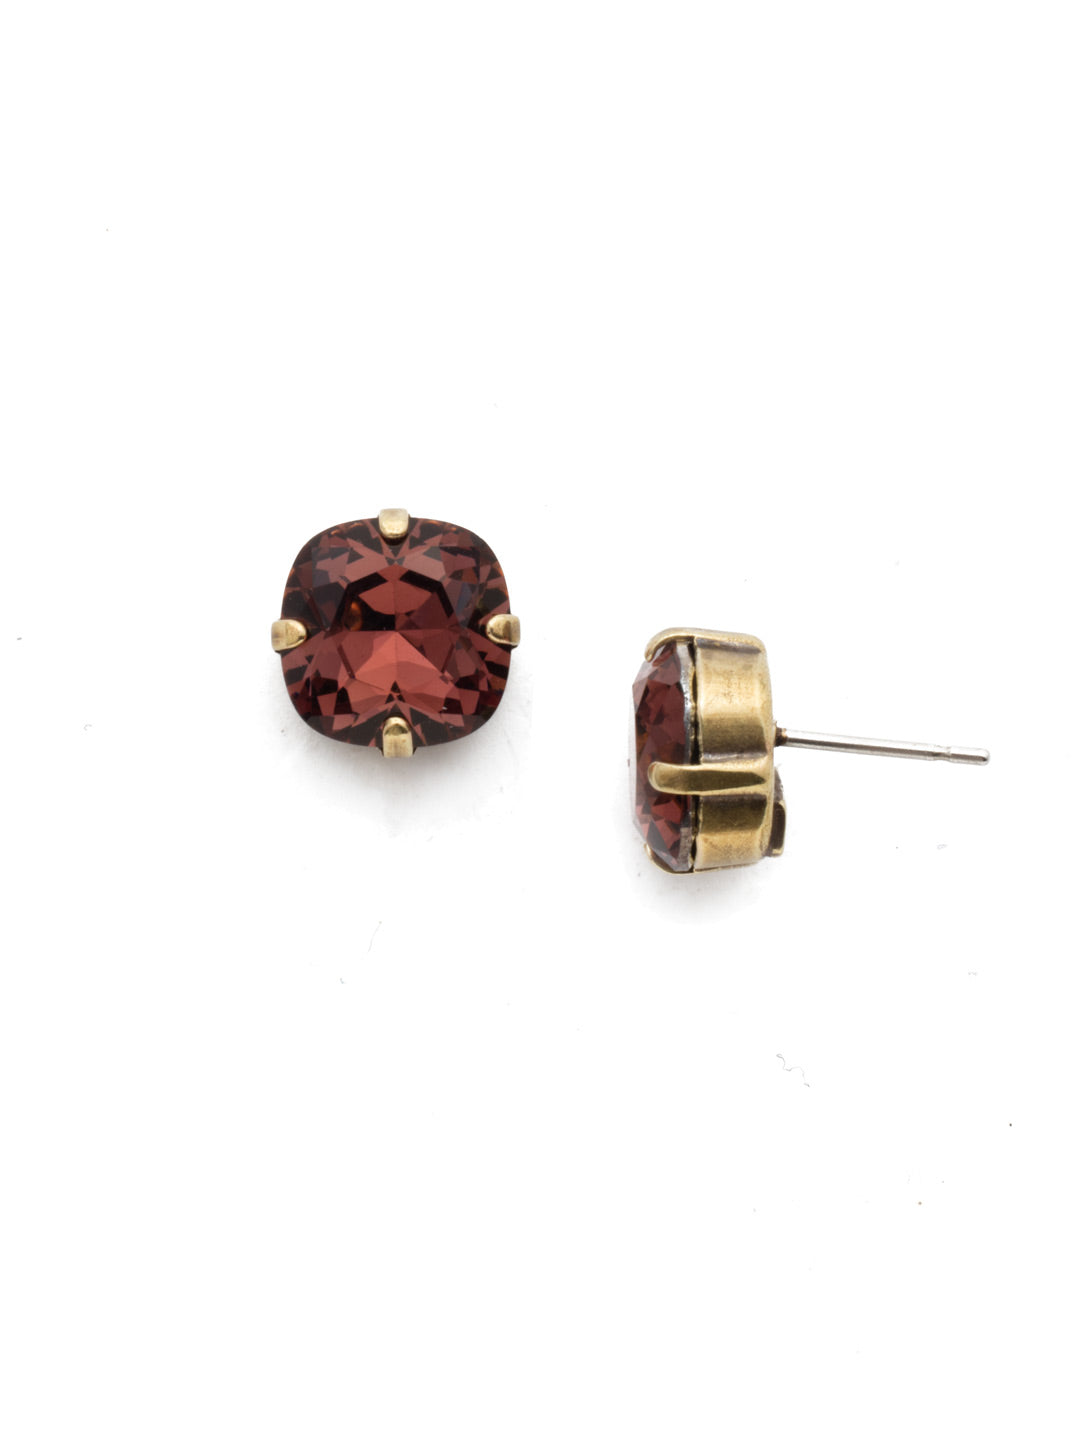 Halcyon Stud Earrings - EDH25AGBUR - A beautiful, luminous cushion-cut crystal in a classic four-pronged setting that's ideal for everyday wear. From Sorrelli's Burgundy collection in our Antique Gold-tone finish.